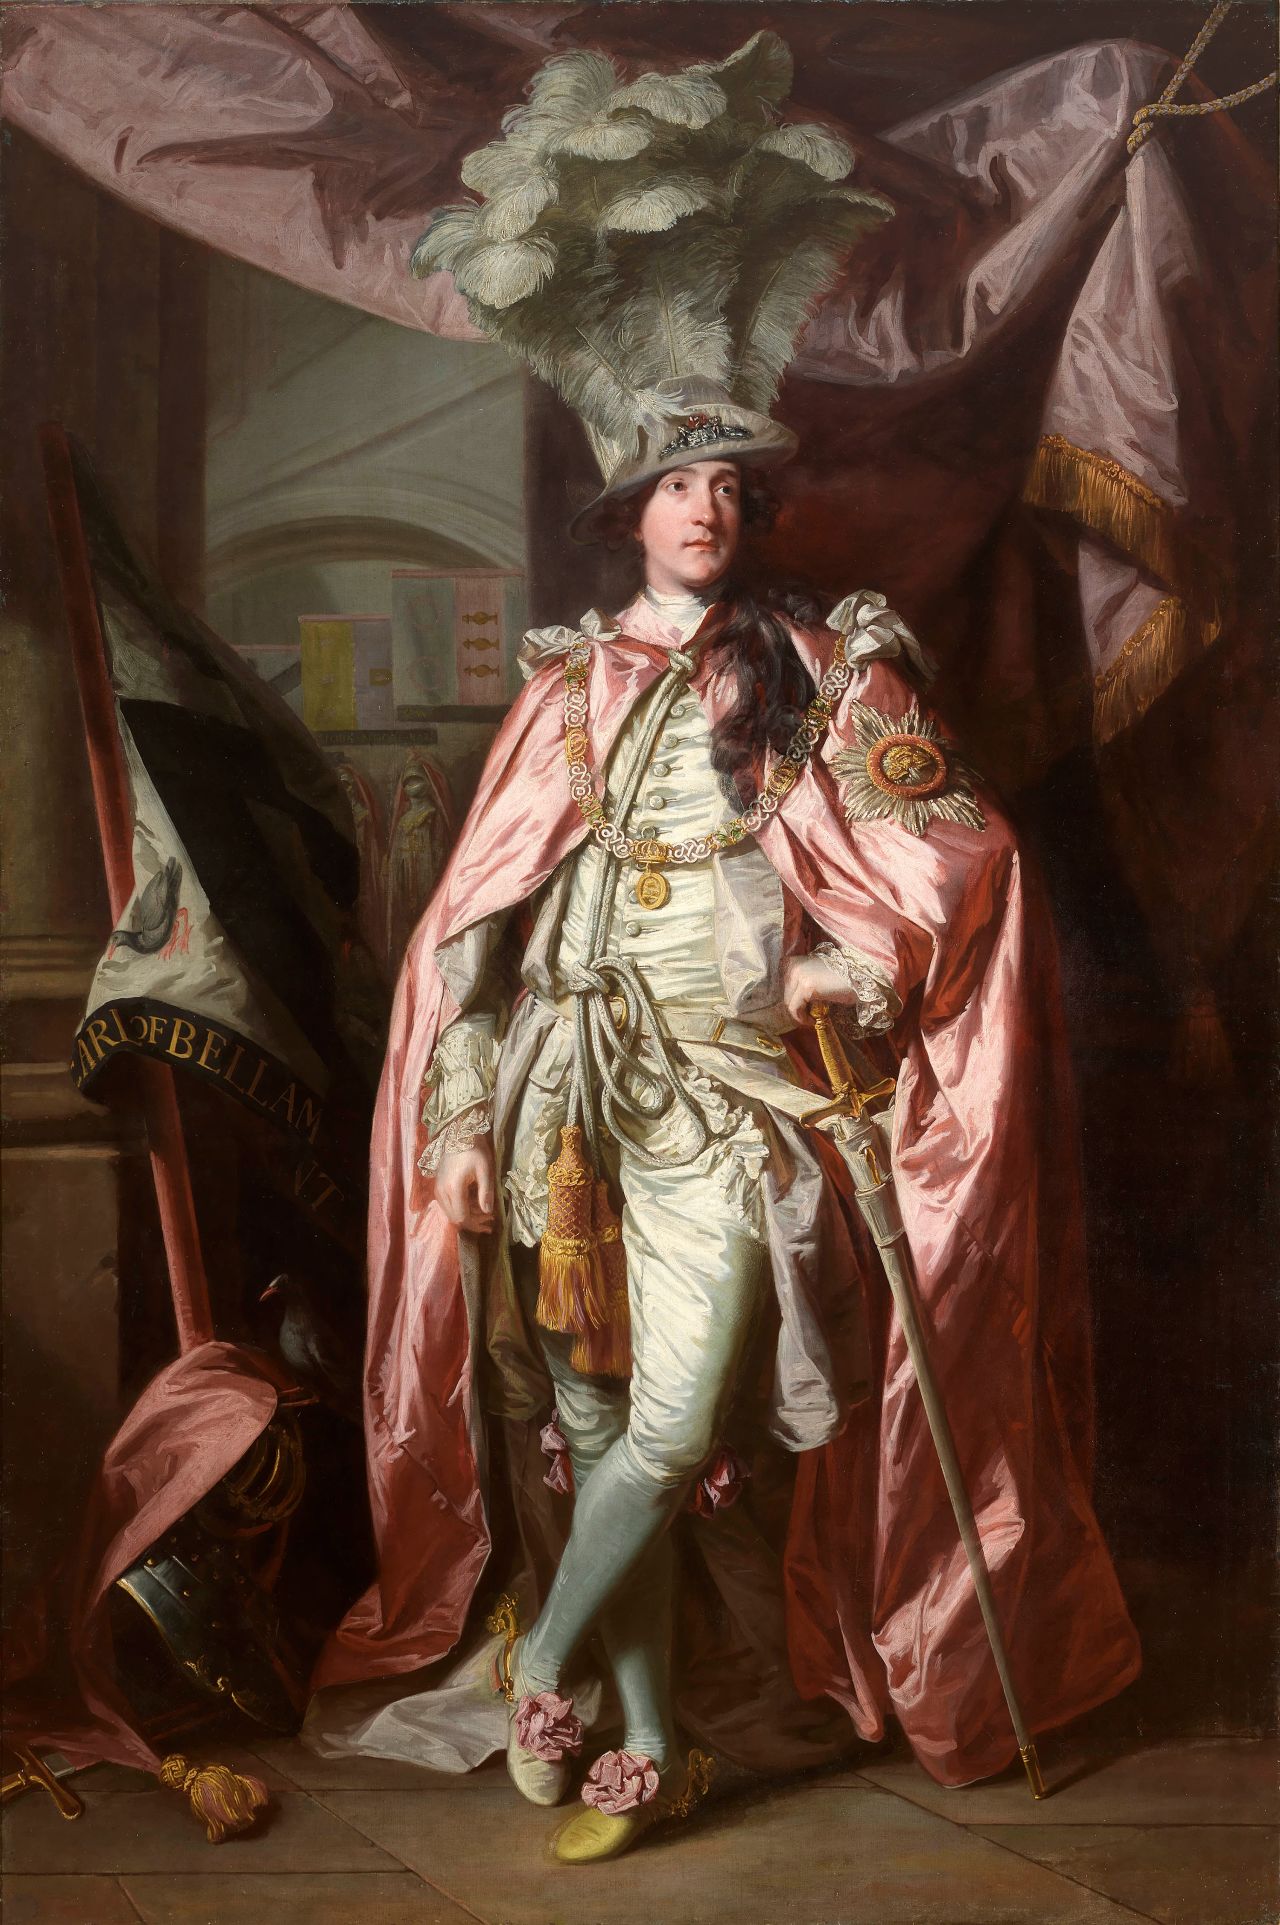 Portrait of Charles Coote, 1st Earl of Bellamont (1738-1800), in Robes of the Order of the Bath, 1773-1774